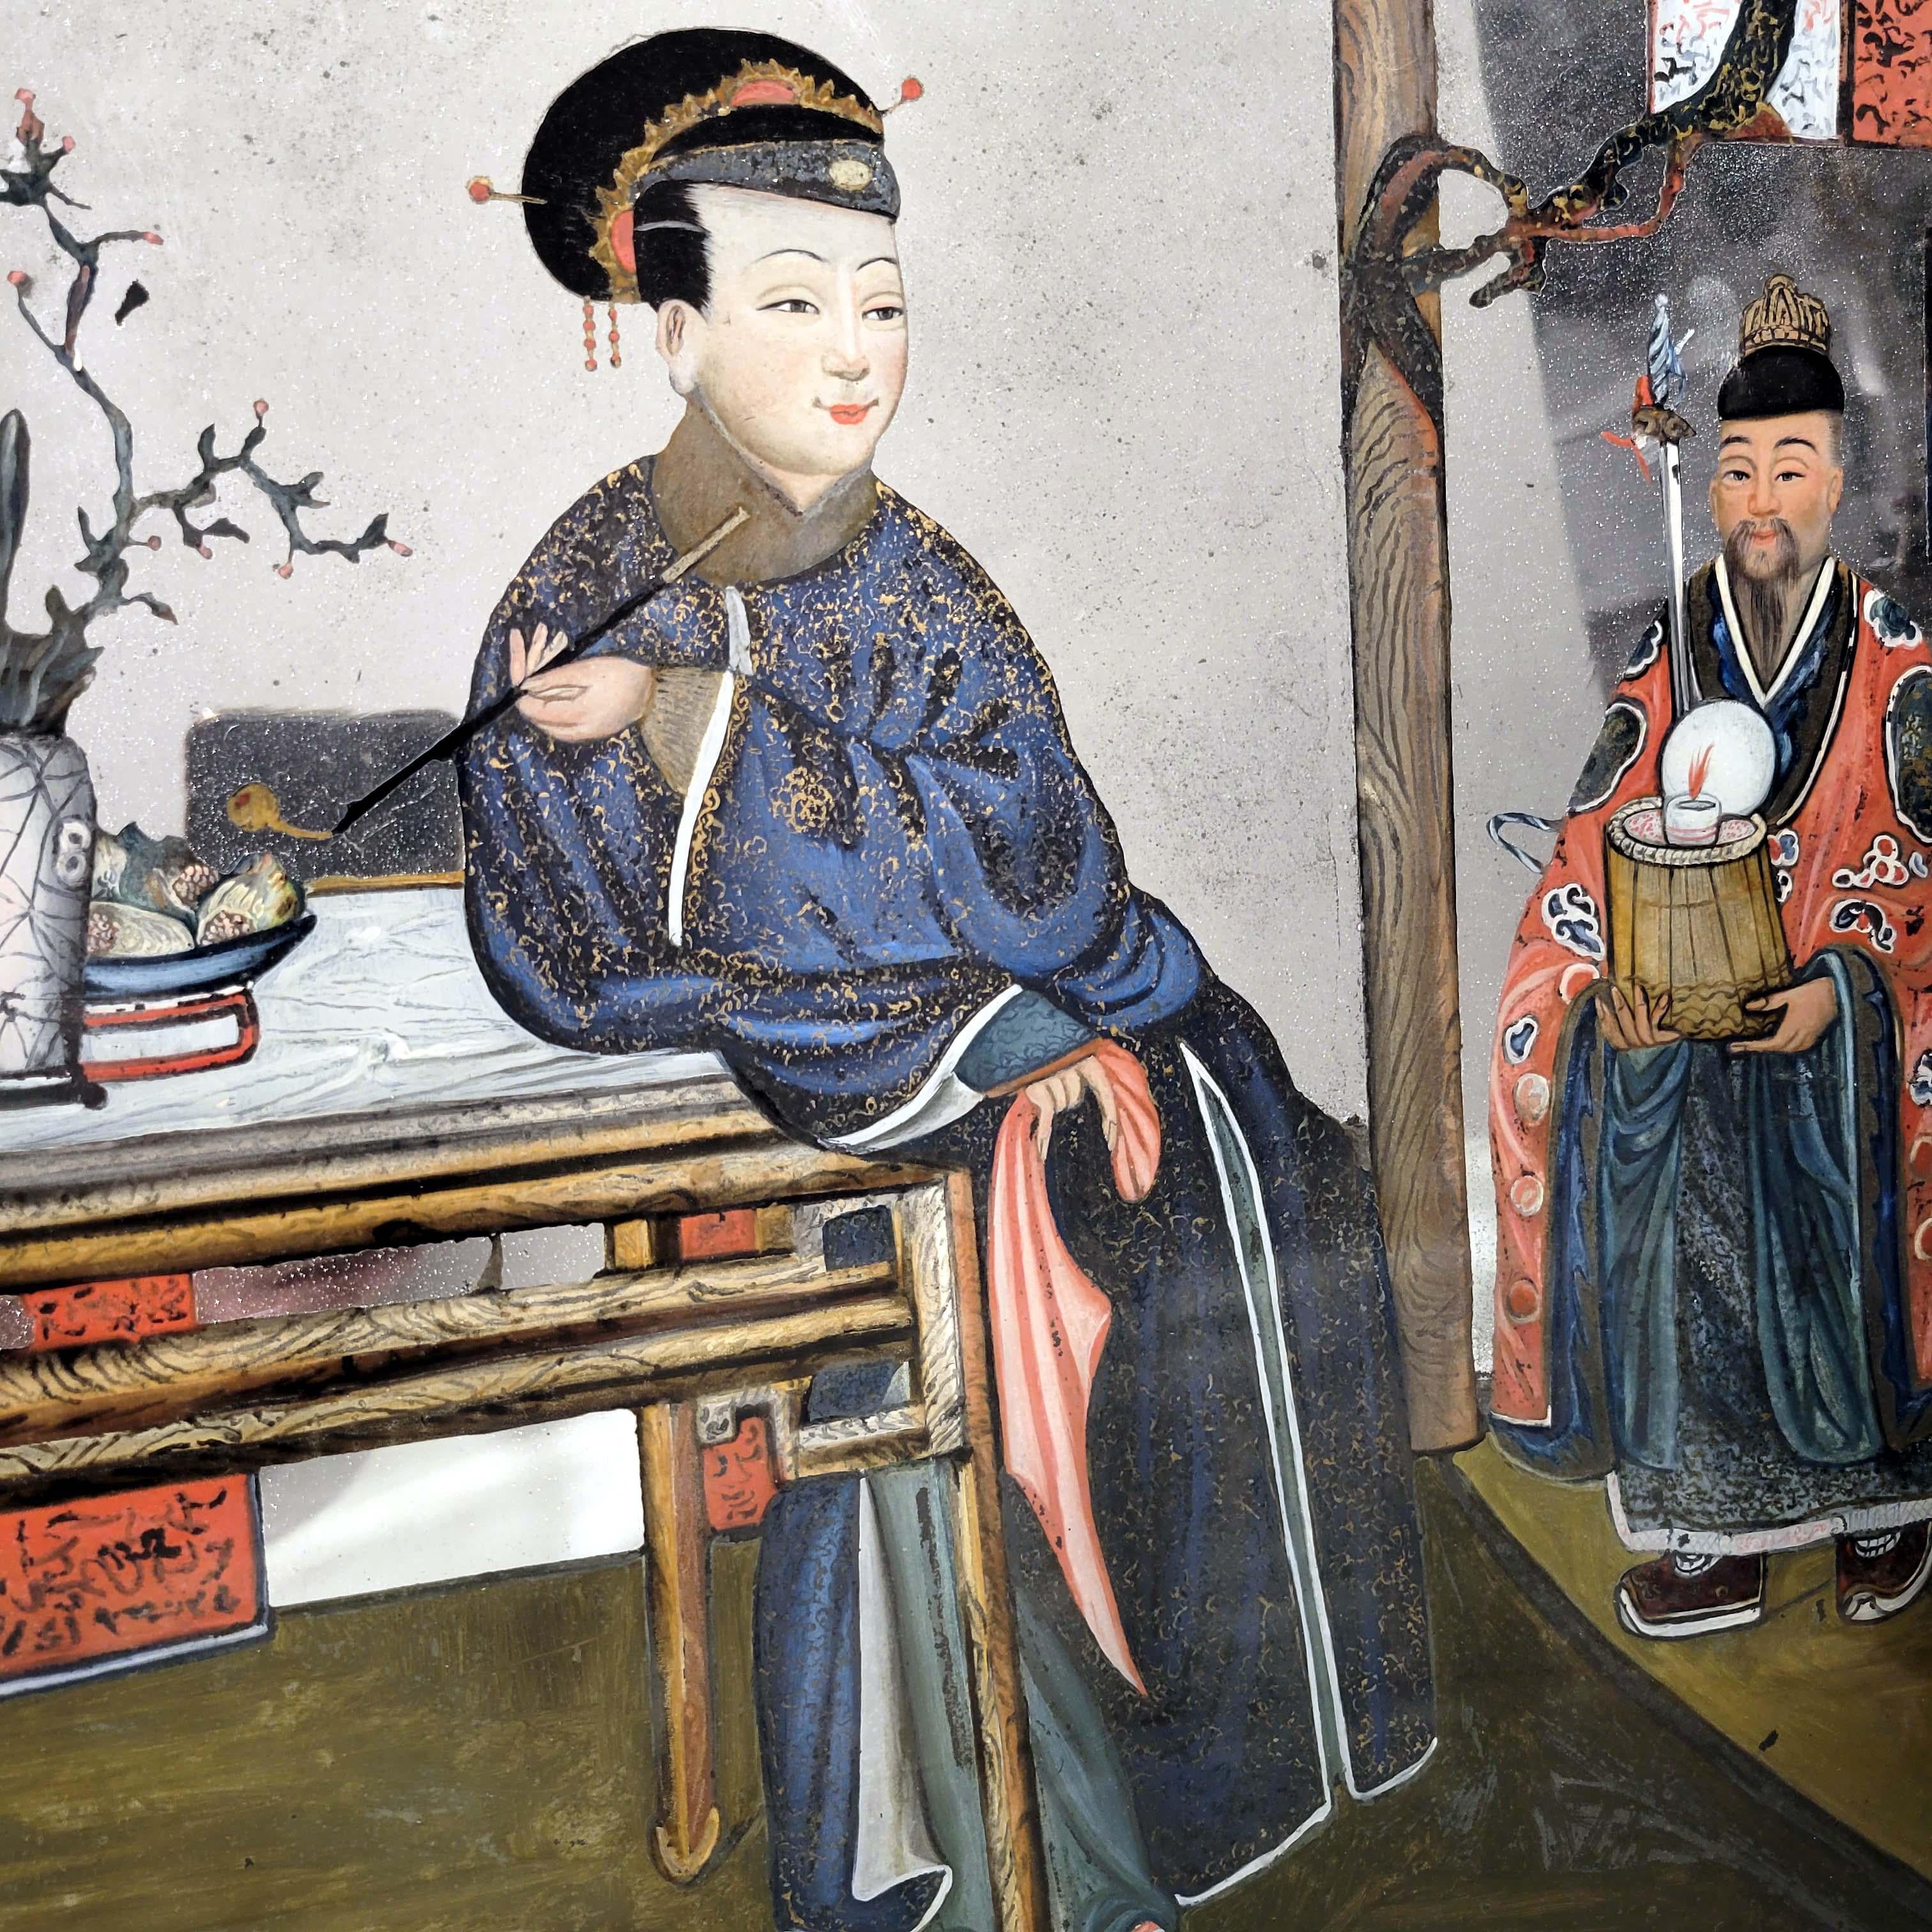 Pair of Chinese Reverse Glass Painting Qing Dynasty, 18th Century For Sale 4